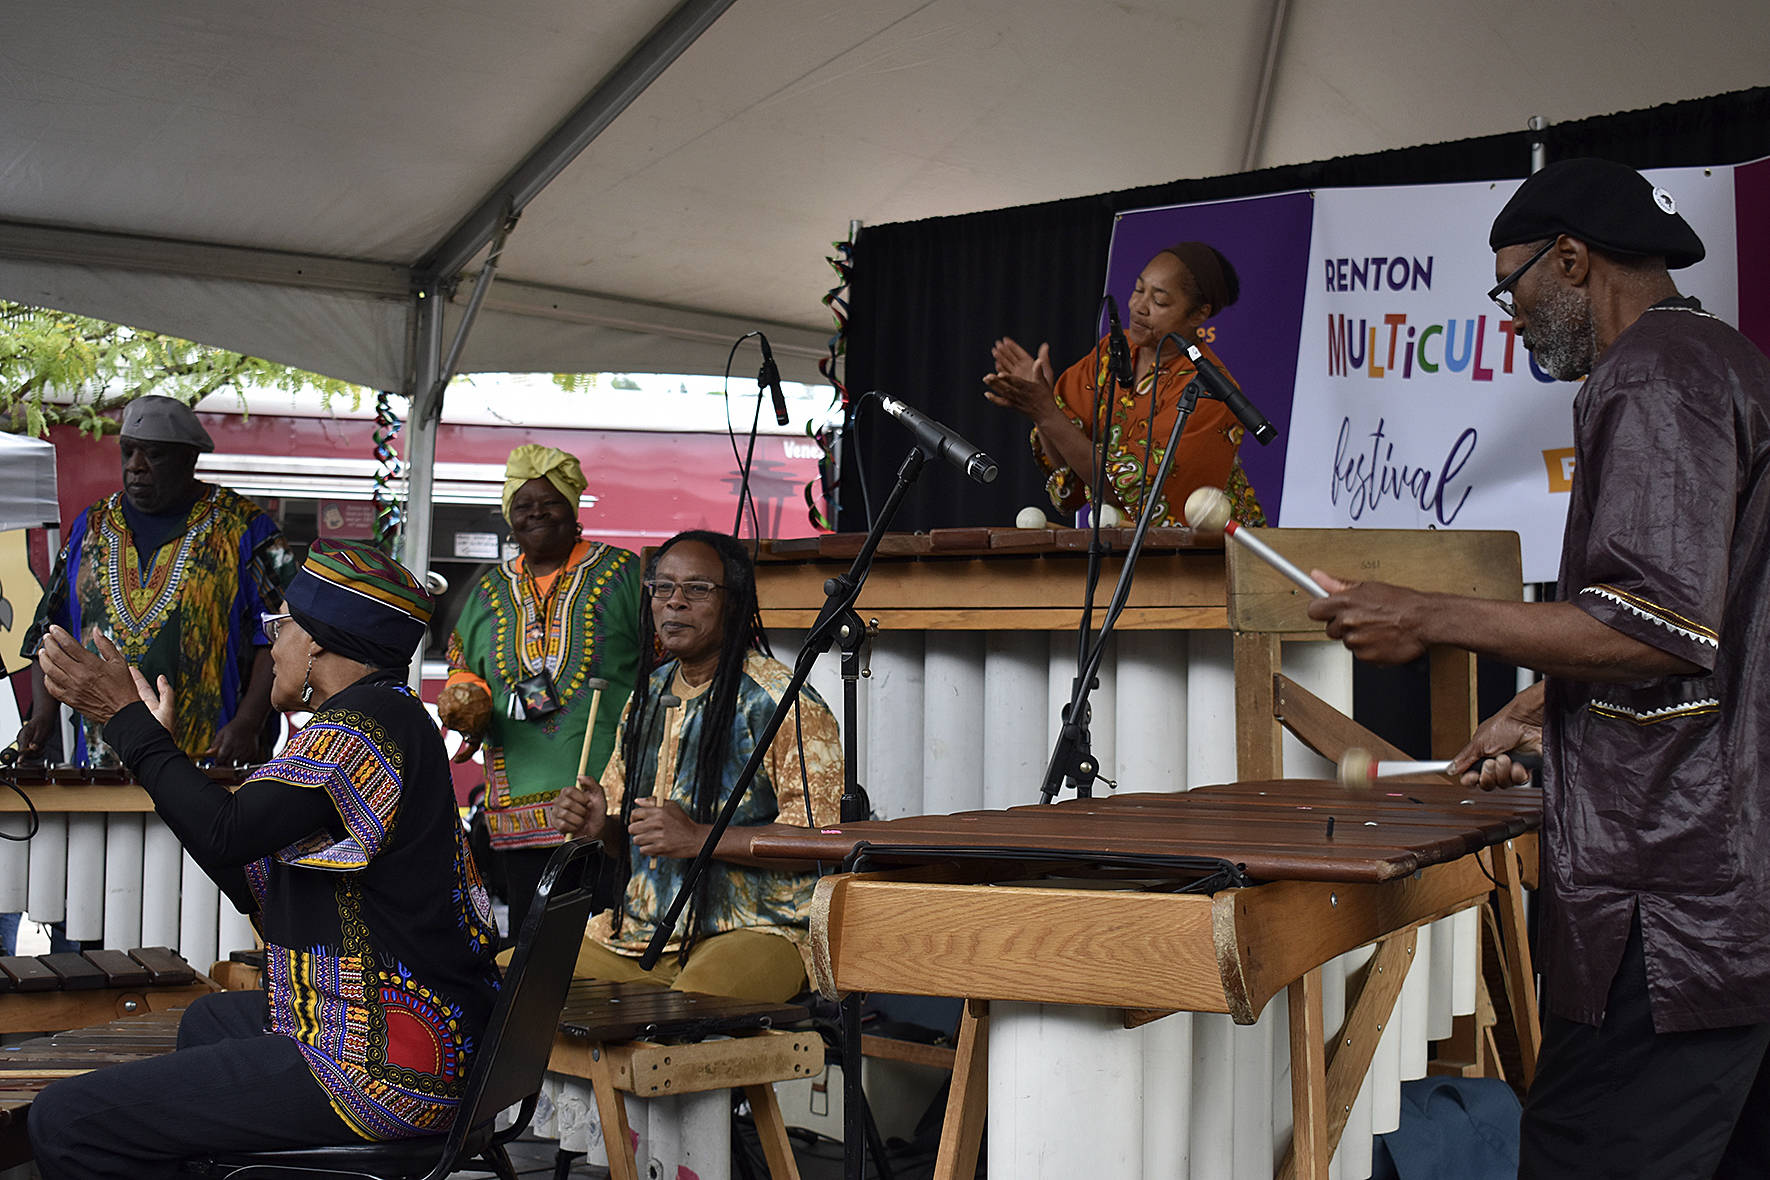 The Renton Multicultural Festival is a two-day celebration of diverse communities within the city. File photo by Haley Ausbun